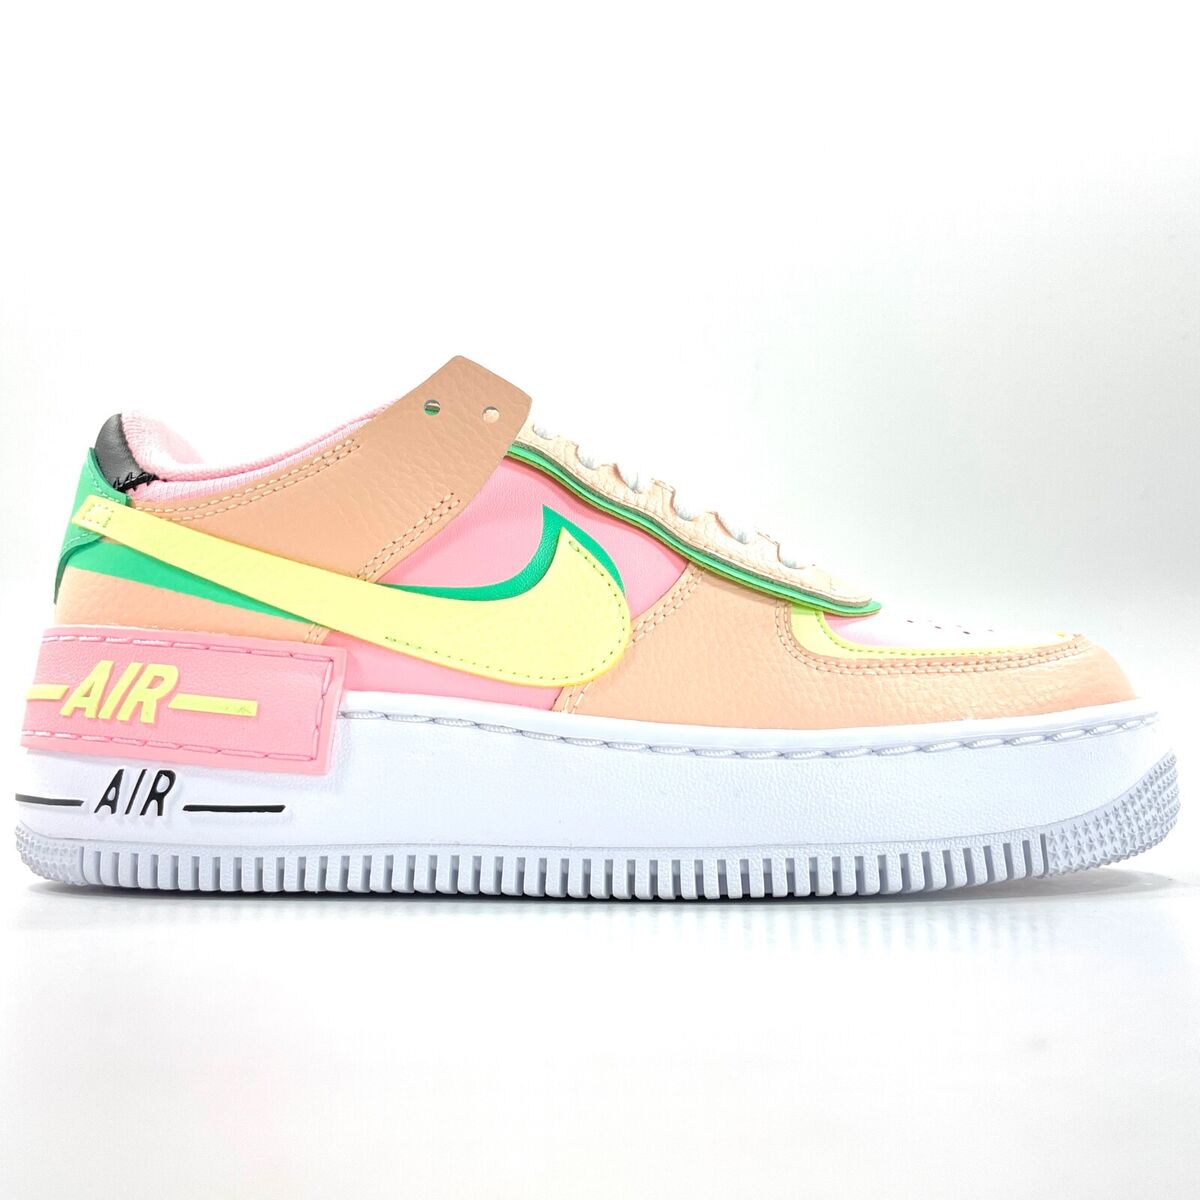 Nike Air Force 1 Shadow Neon Accent Sneakers Women in Green